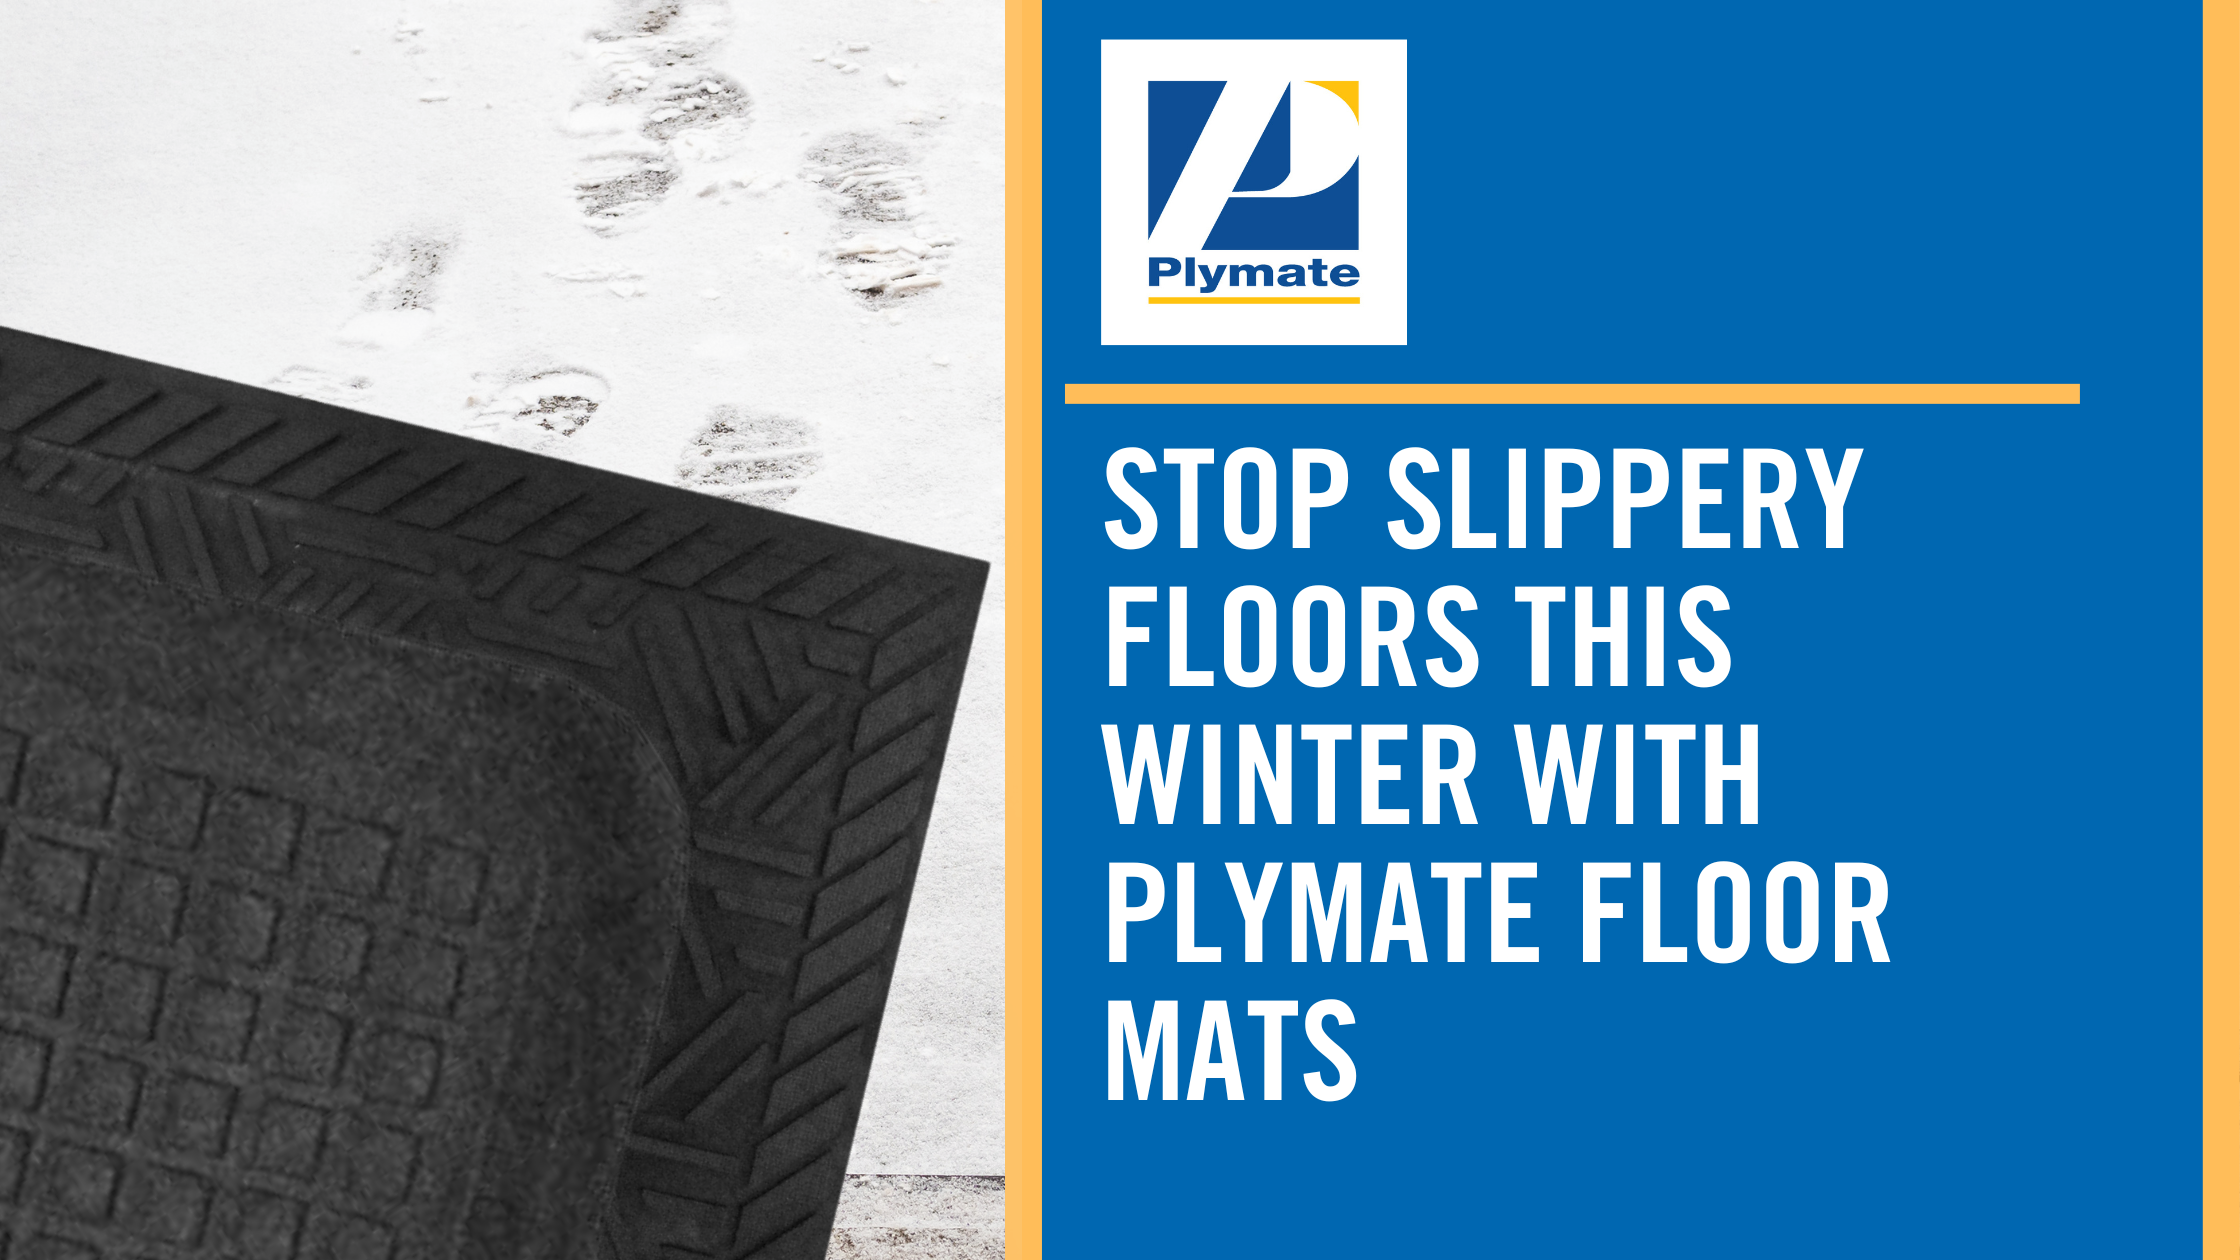 Stop slippery floors this winter with Plymate floor mats blog image